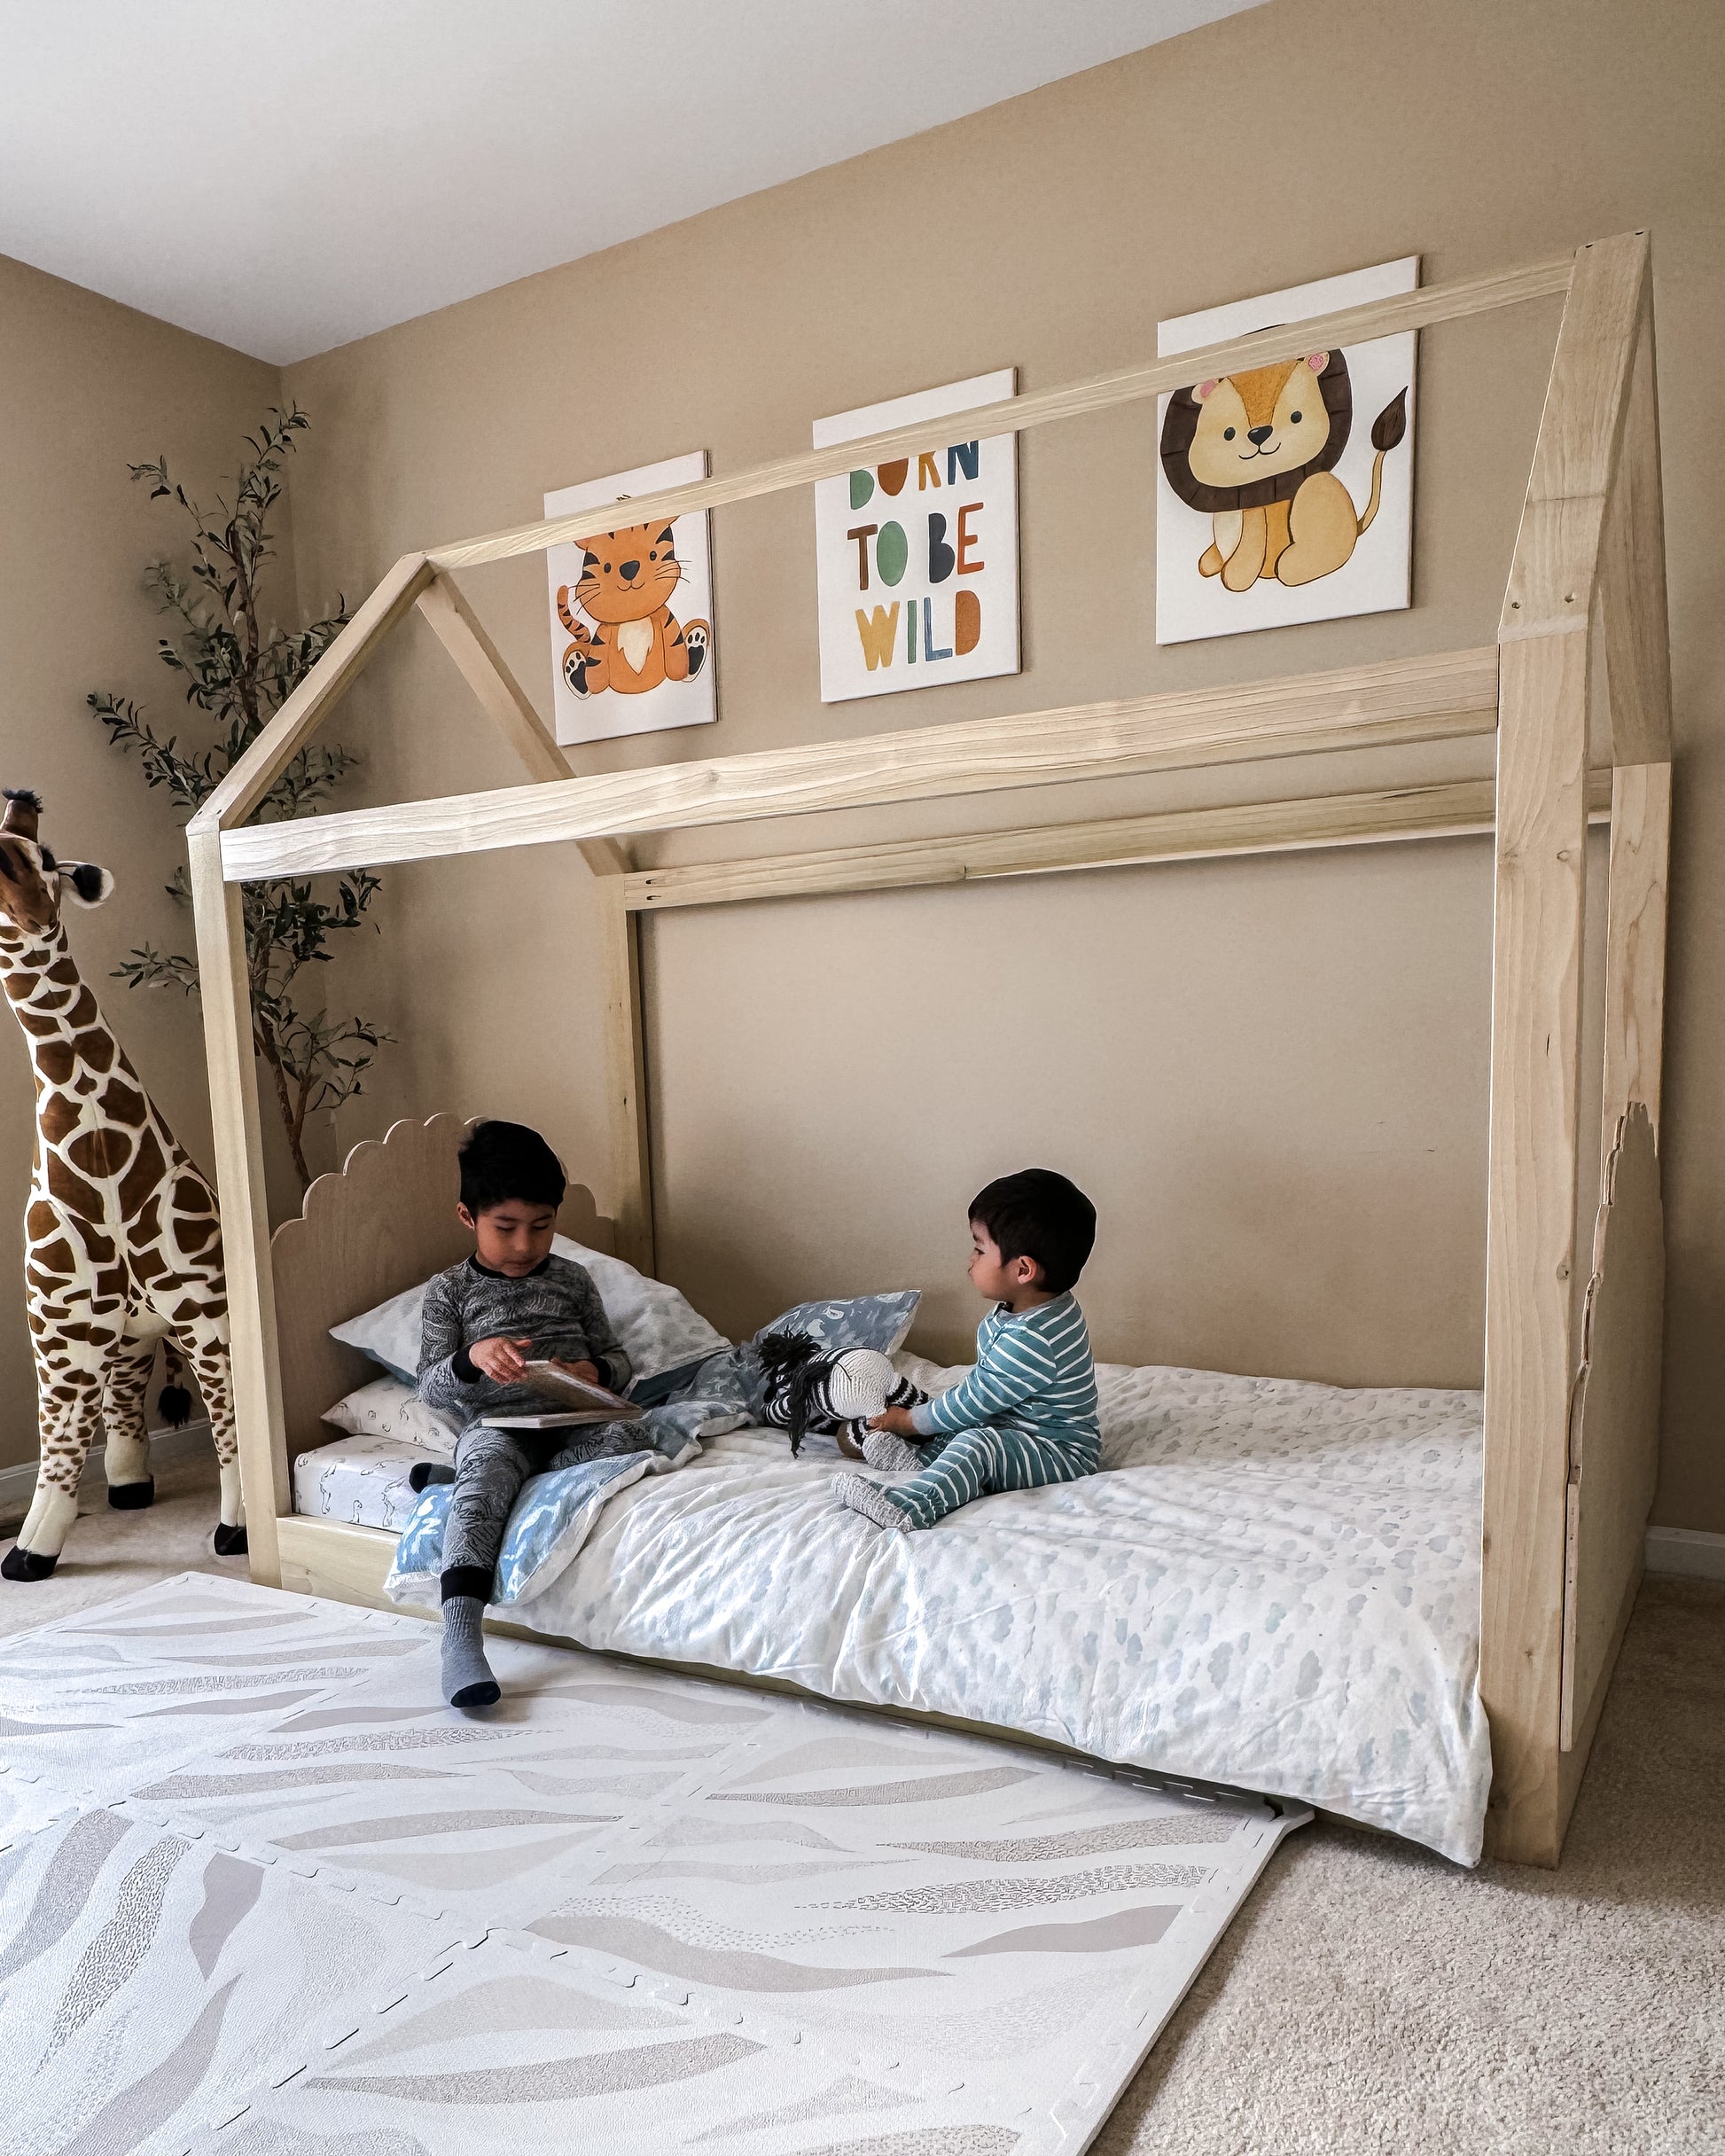 A cozy house-shaped children's bed made entirely of natural wood, featuring a headboard and footboard for added comfort and style. The bed resembles a quaint cottage. Crafted from sturdy wood, the frame provides stability and durability. Inside, a comfortable mattress with soft bedding invites children to rest and play. This wooden house bed with a headboard and footboard creates a cozy and inviting sleep space, perfect for fostering imagination and comfort in a child's bedroom.